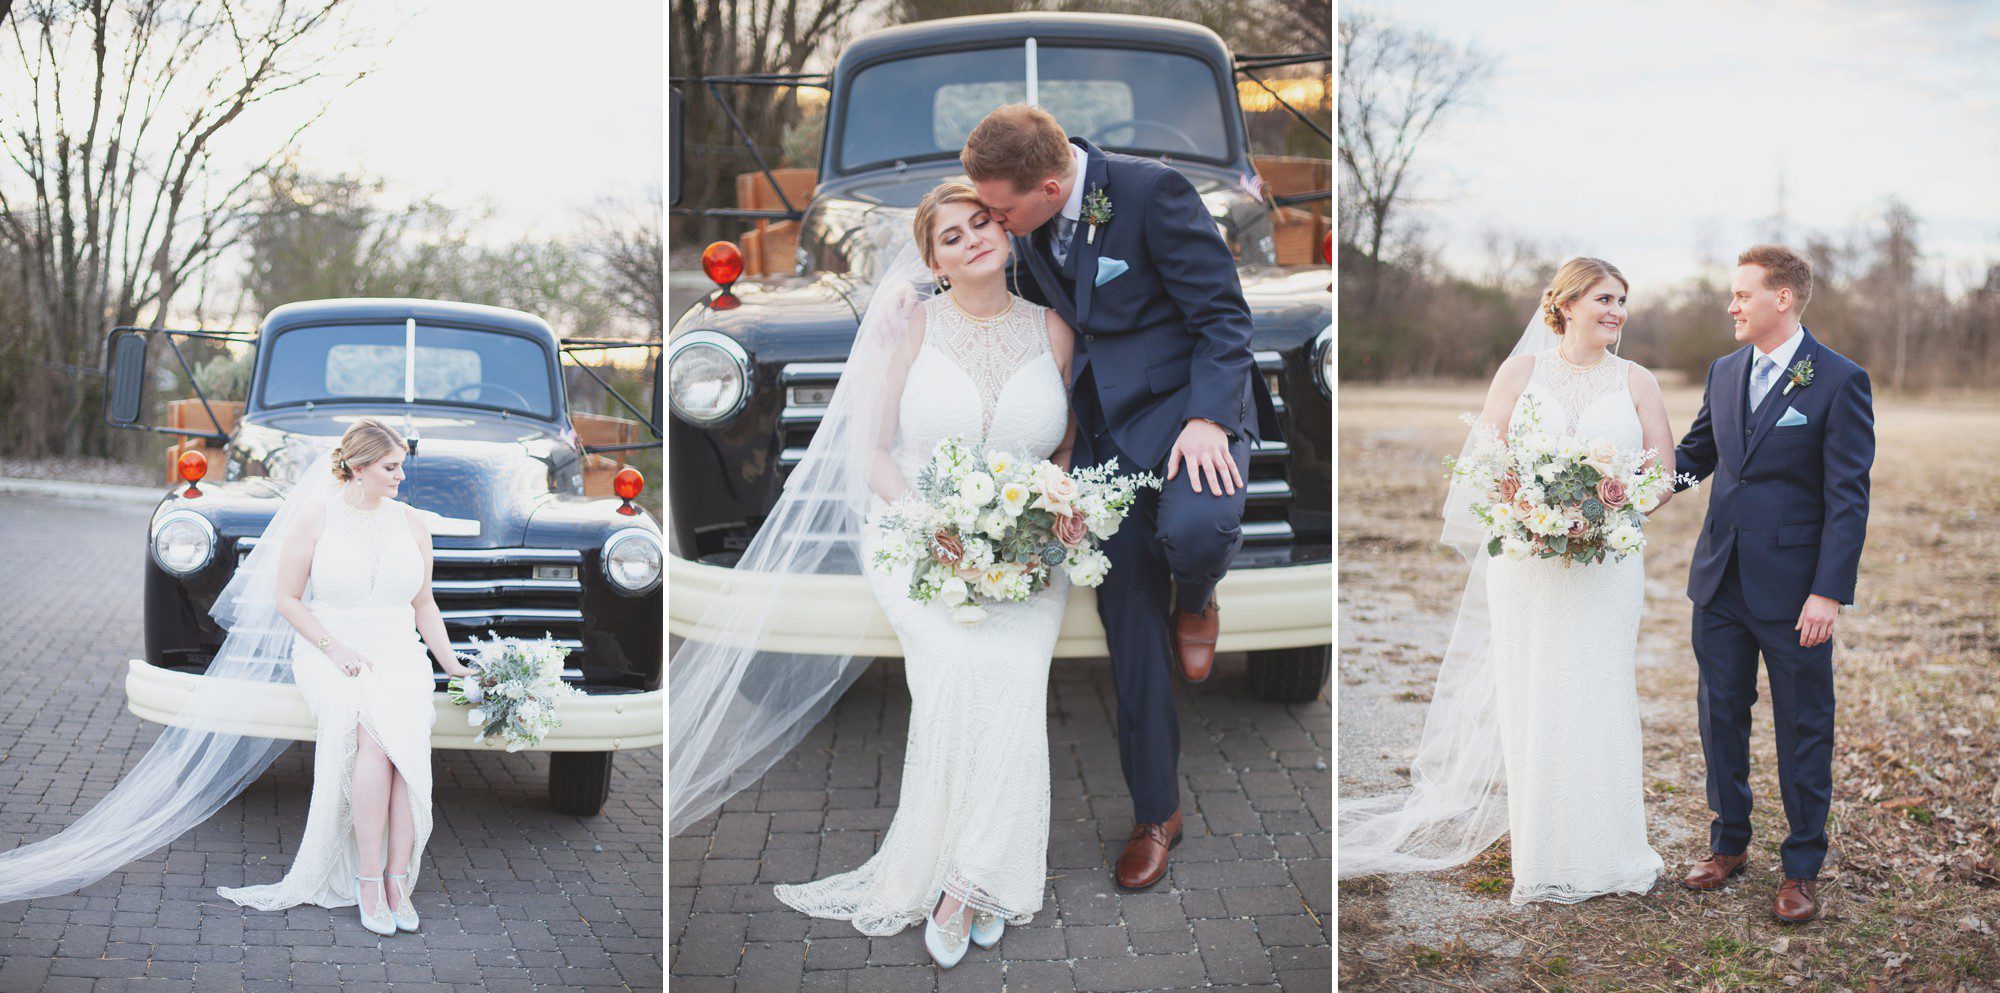 Bride and groom photos with vintage truck at McConnell House in Franklin, TN before wedding ceremony. Photos by Krista Lee Photography Nashville, TN